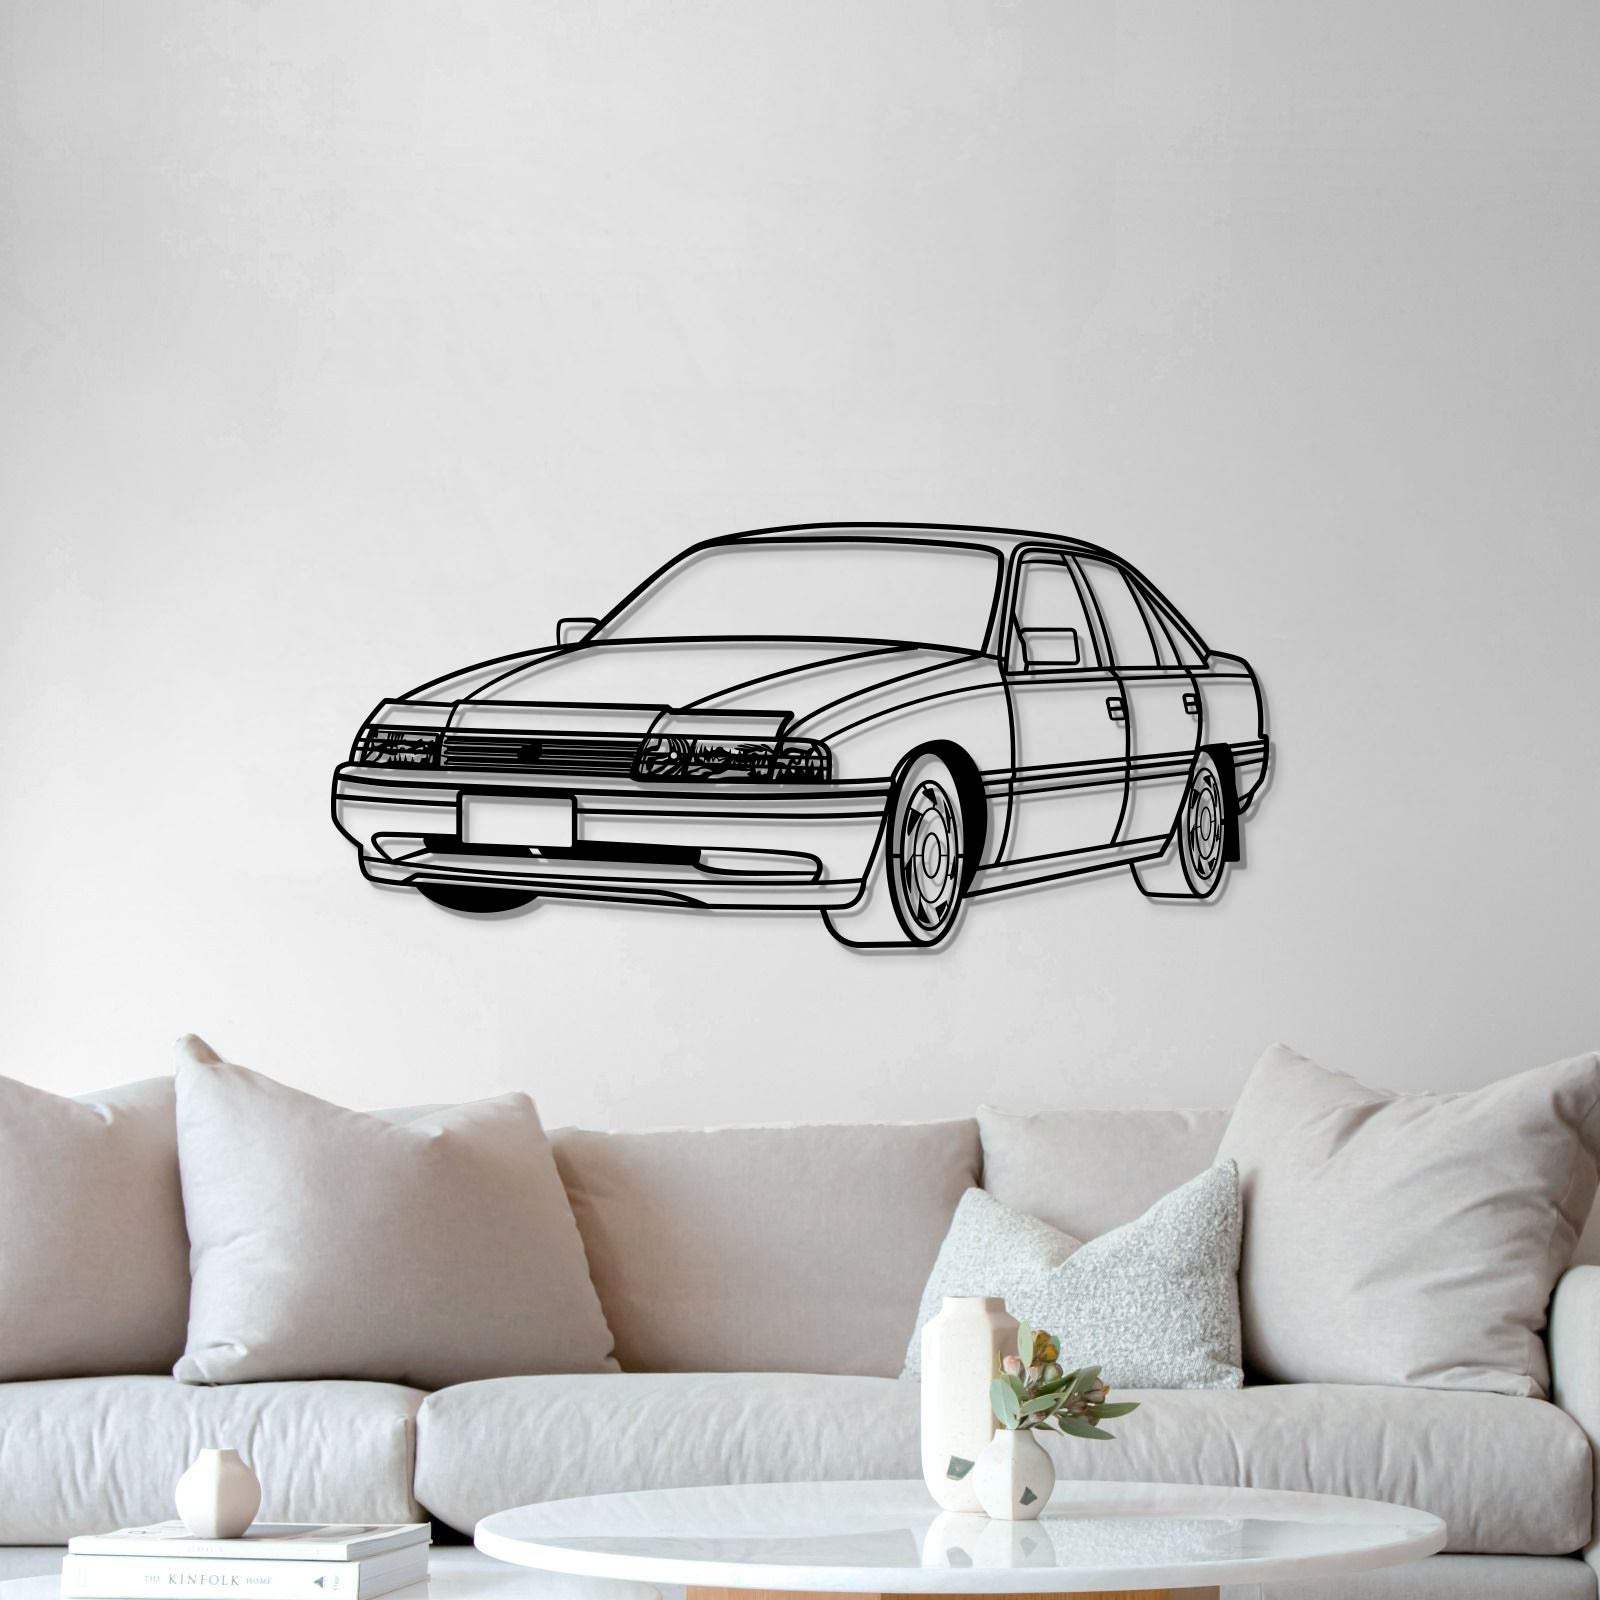 1991 VN Commodore Perspective Metal Car Wall Art - MT1162